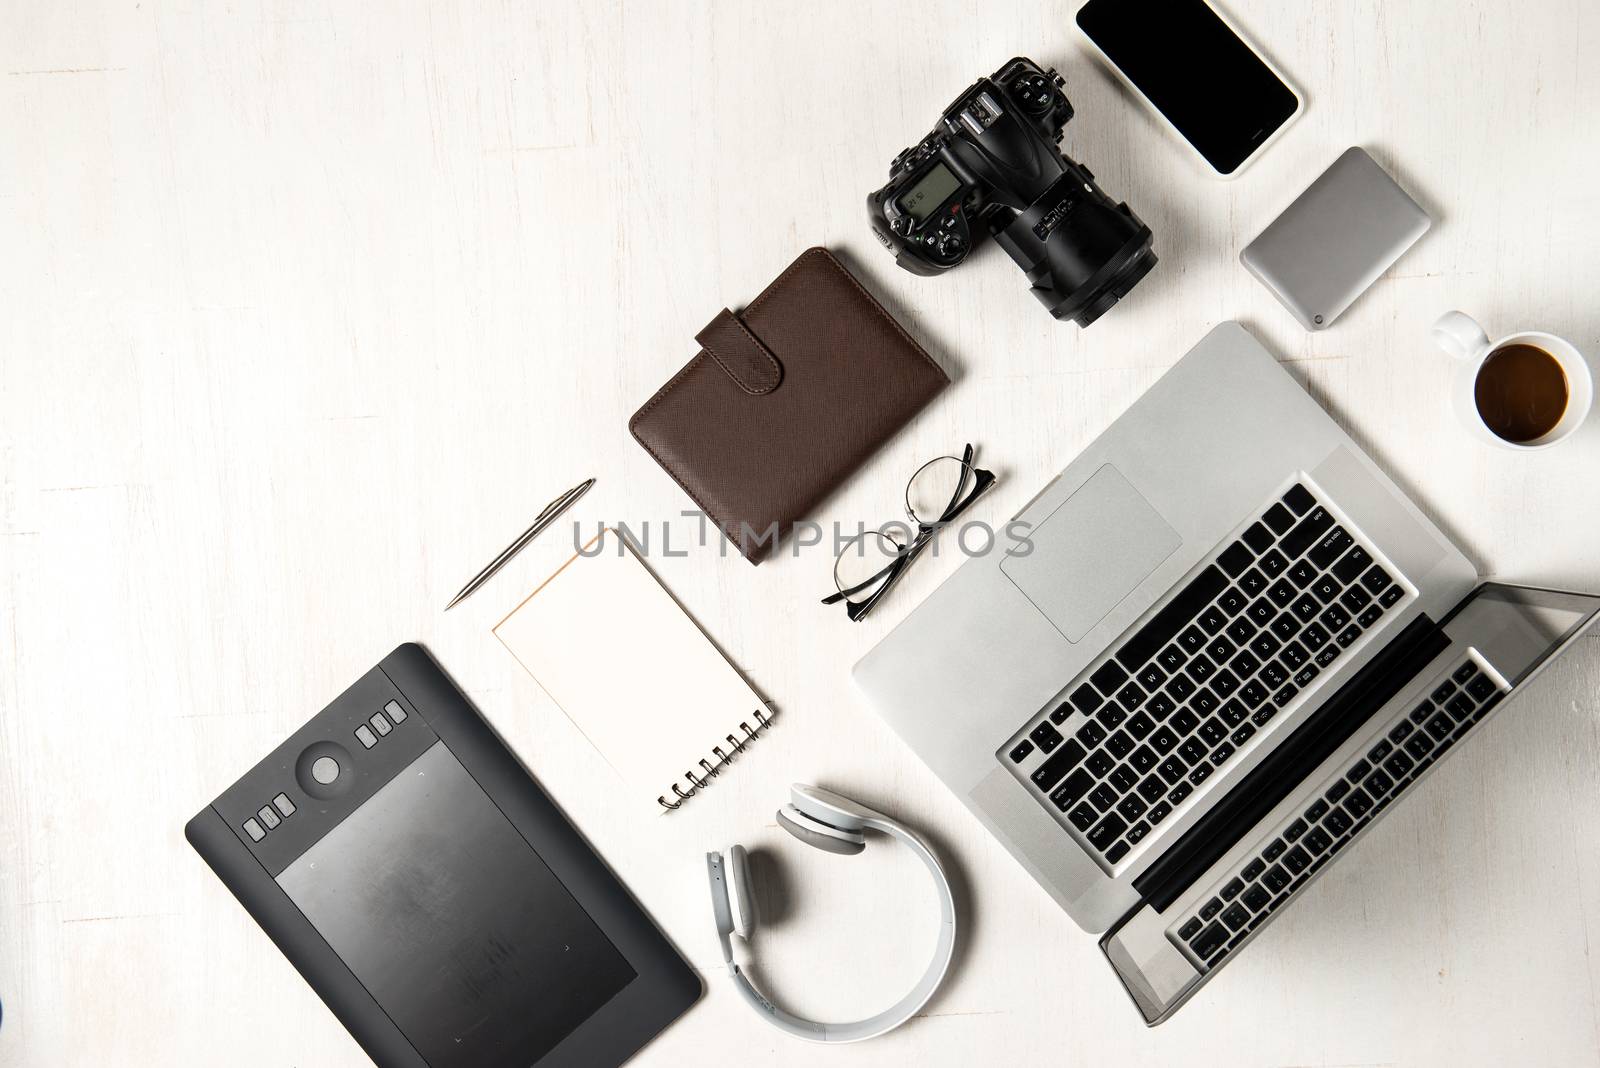 Work space for photographer, graphic designer. Flat lay of laptop, camera, colorchart, digital tablet, coffee cup, book, pencil on wooden table.